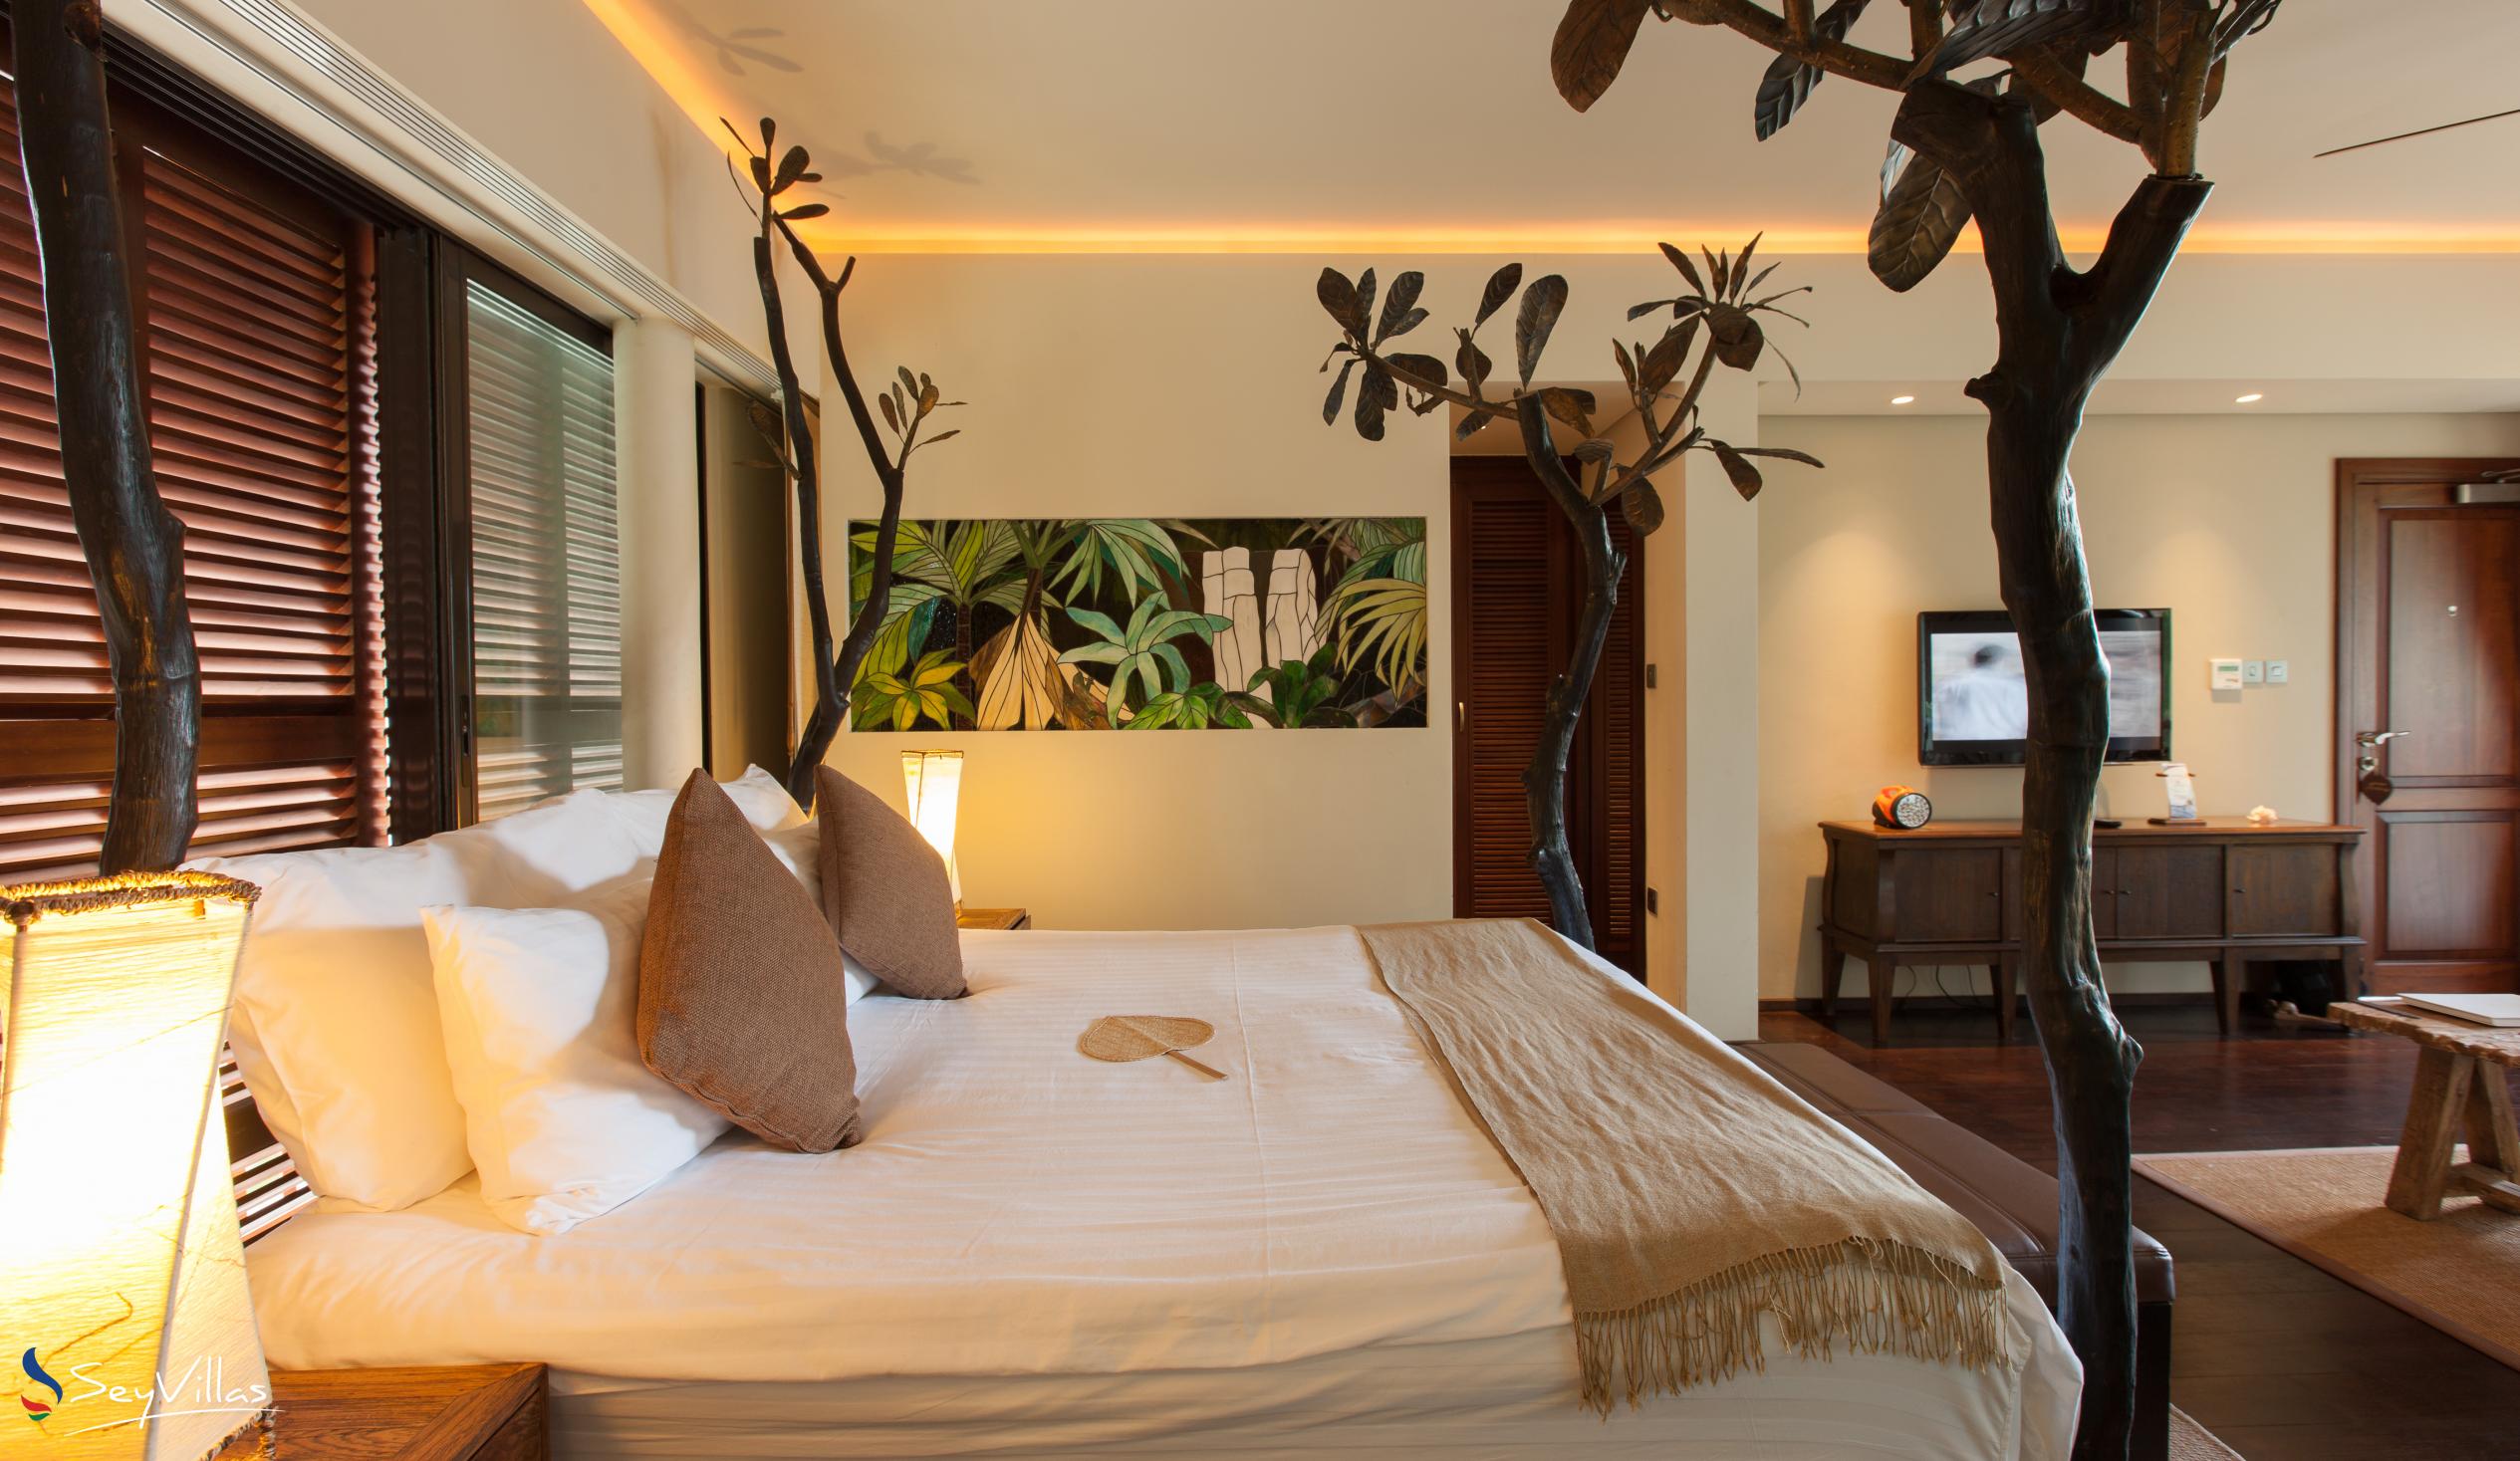 Photo 42: Dhevatara Beach Hotel - Sea View Suite with Kingsize Bed - Praslin (Seychelles)